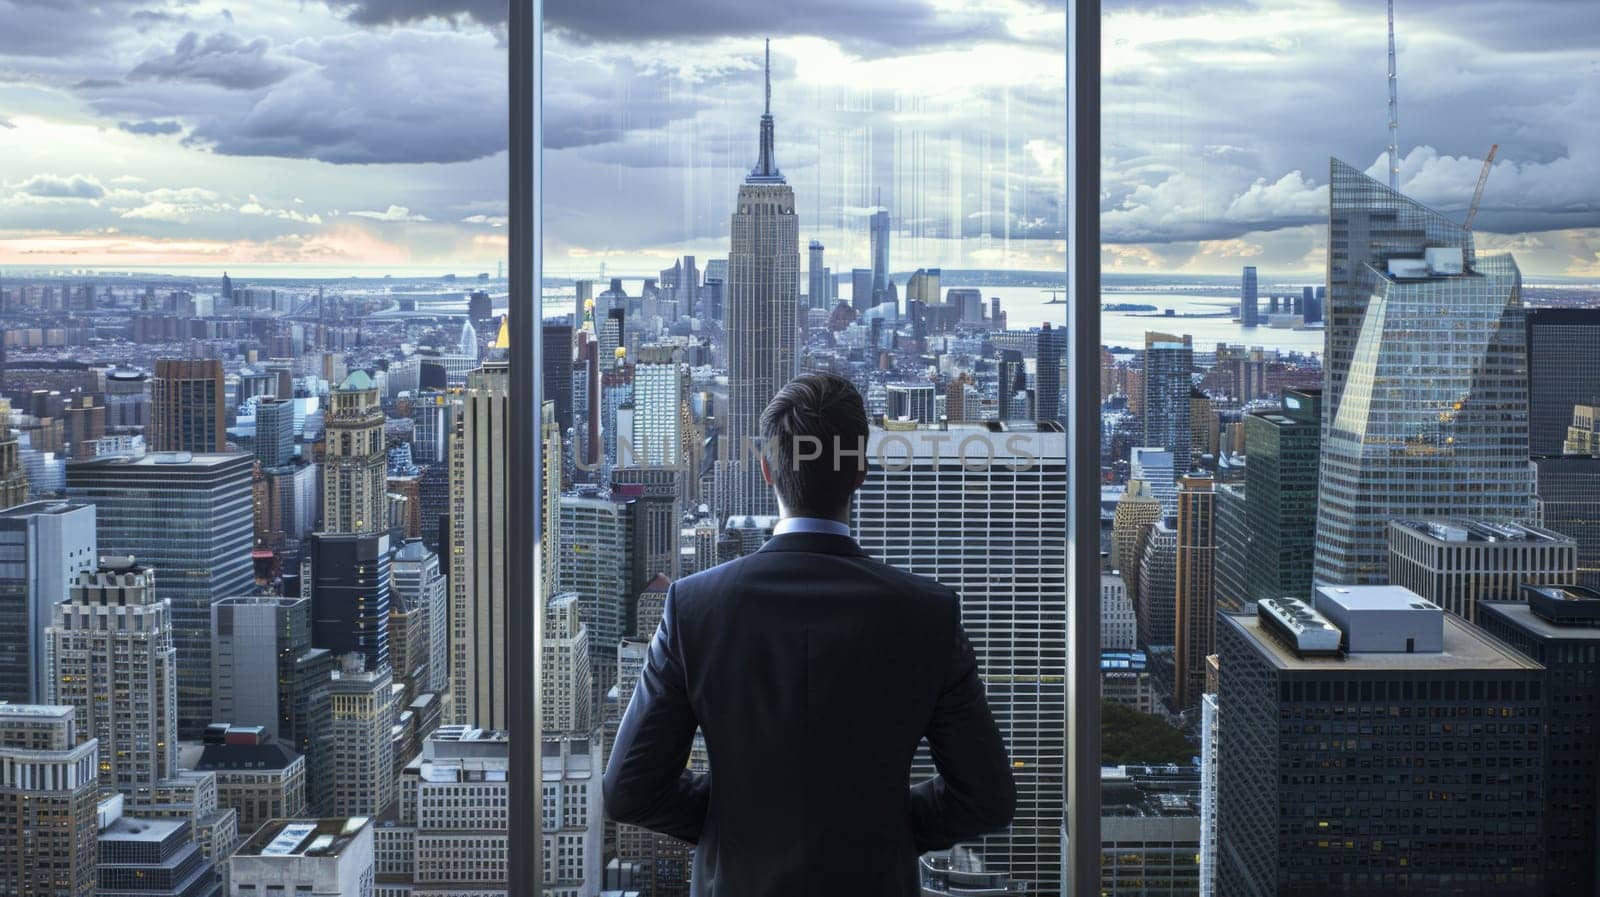 Rear view of a business man in a suit looking out a window at the city with skyscrapers in the background by papatonic